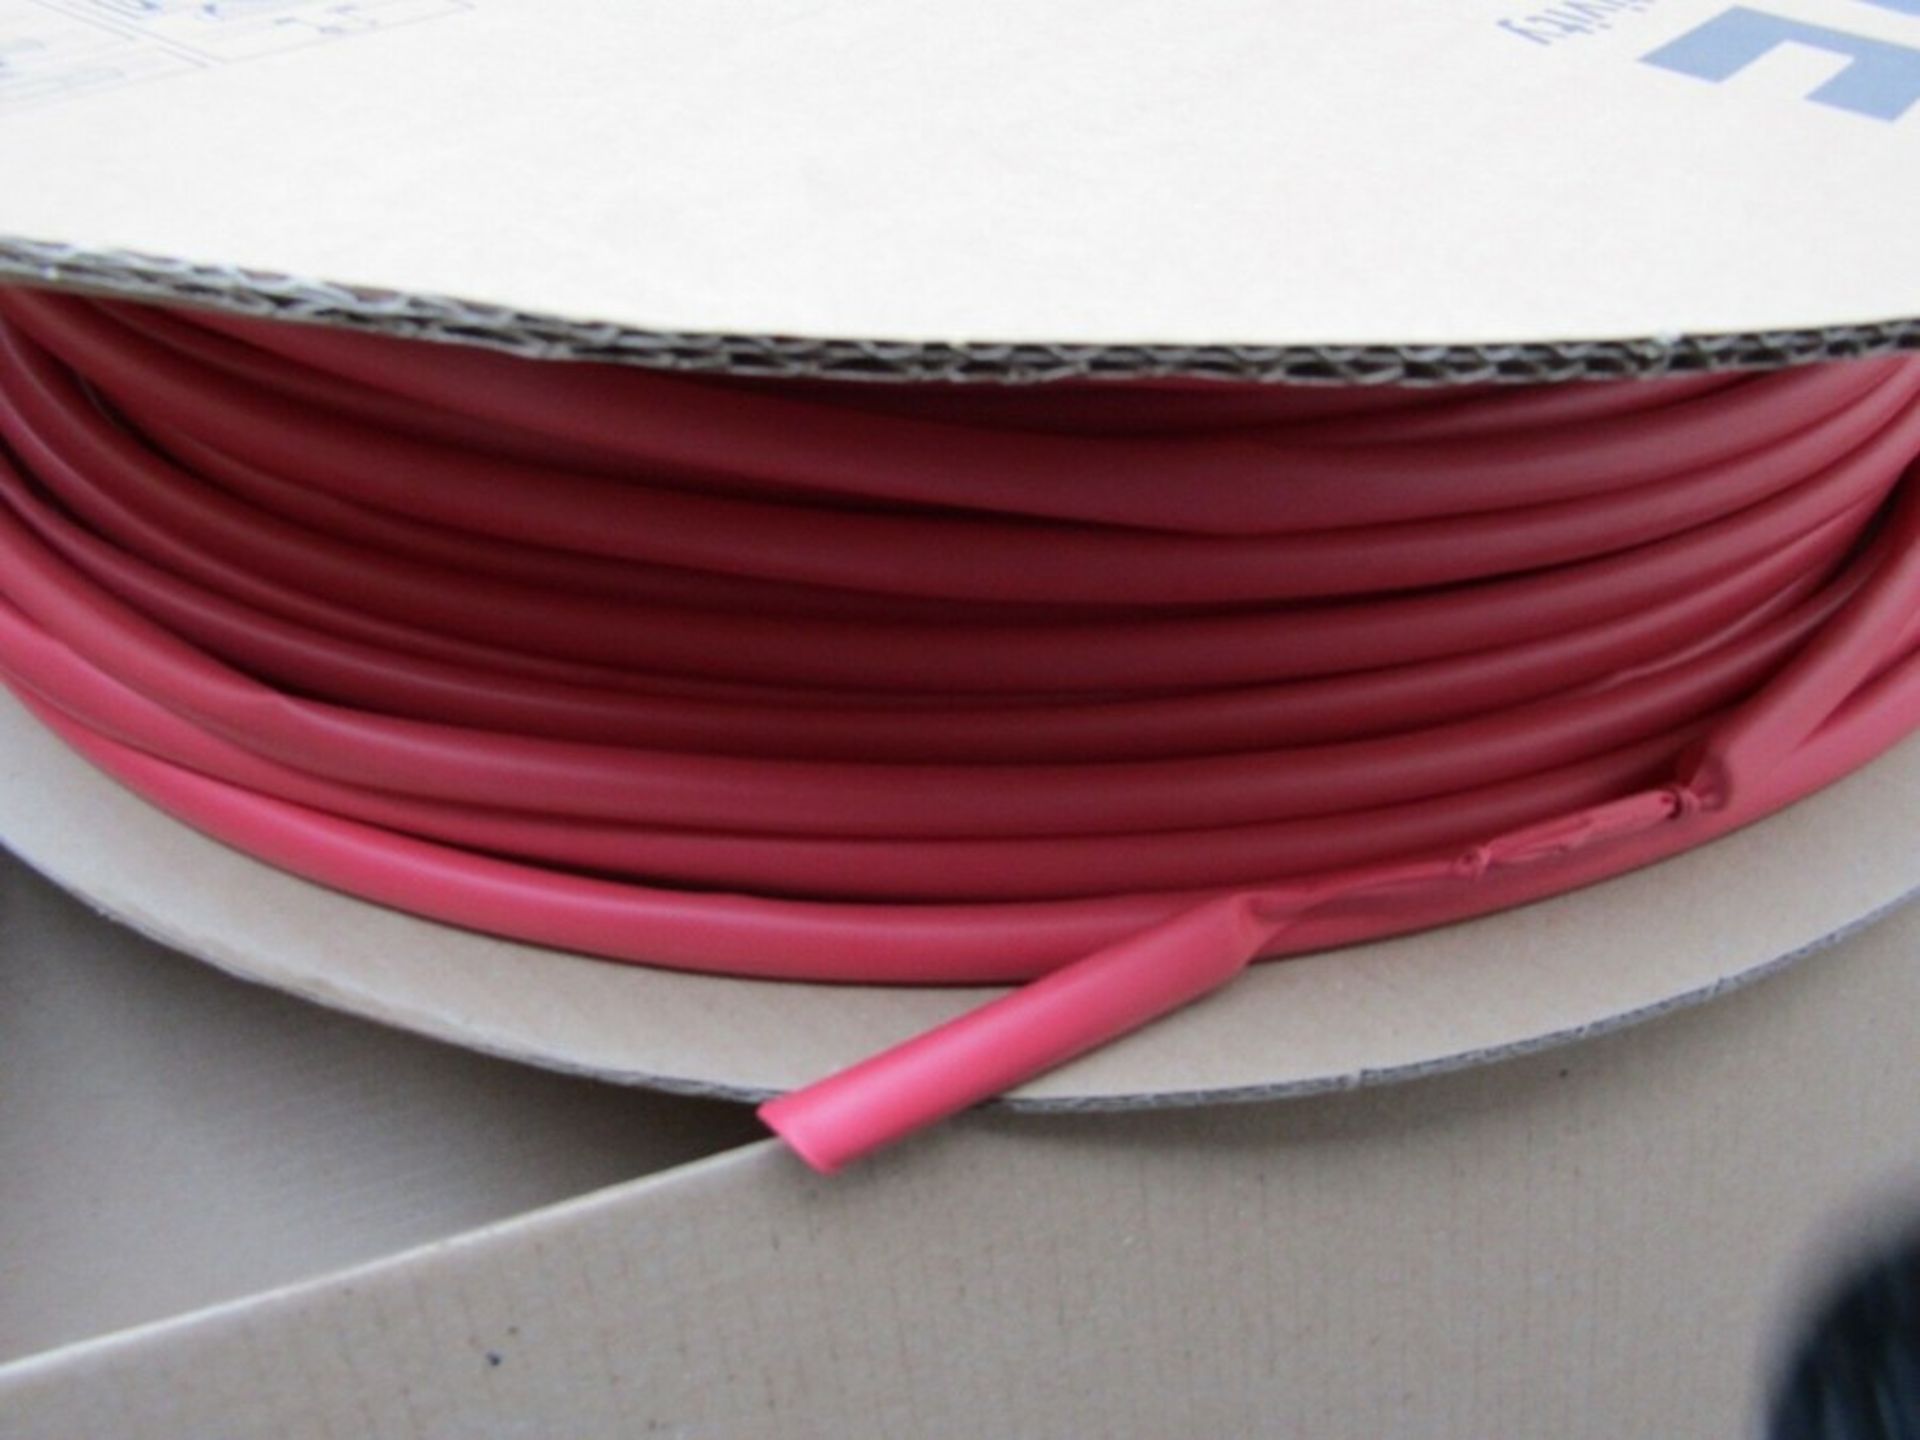 200m x TE Connectivity Red 4:1 Heat Shrink Tubing 12mm Dia. x 1.2m H9RB 8478265 - Image 2 of 3